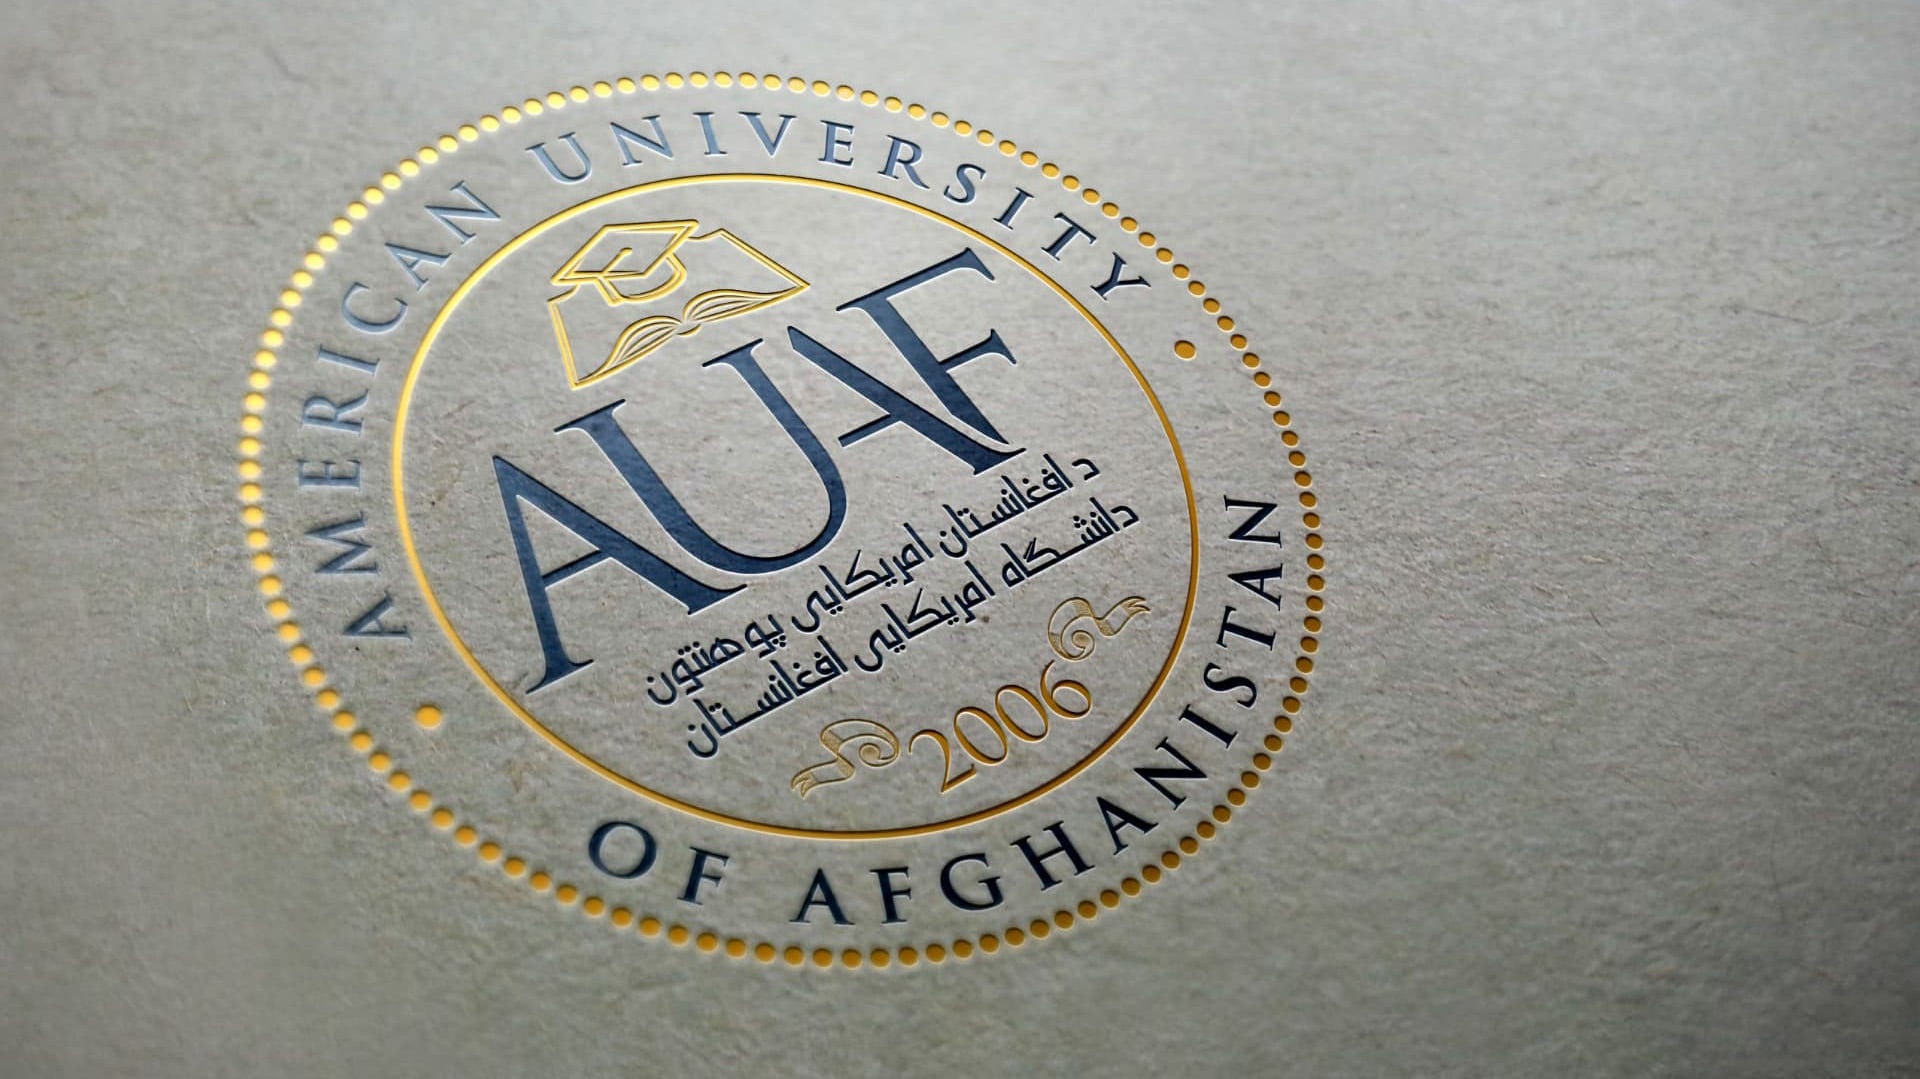 The seal of the American University of Afghanistan